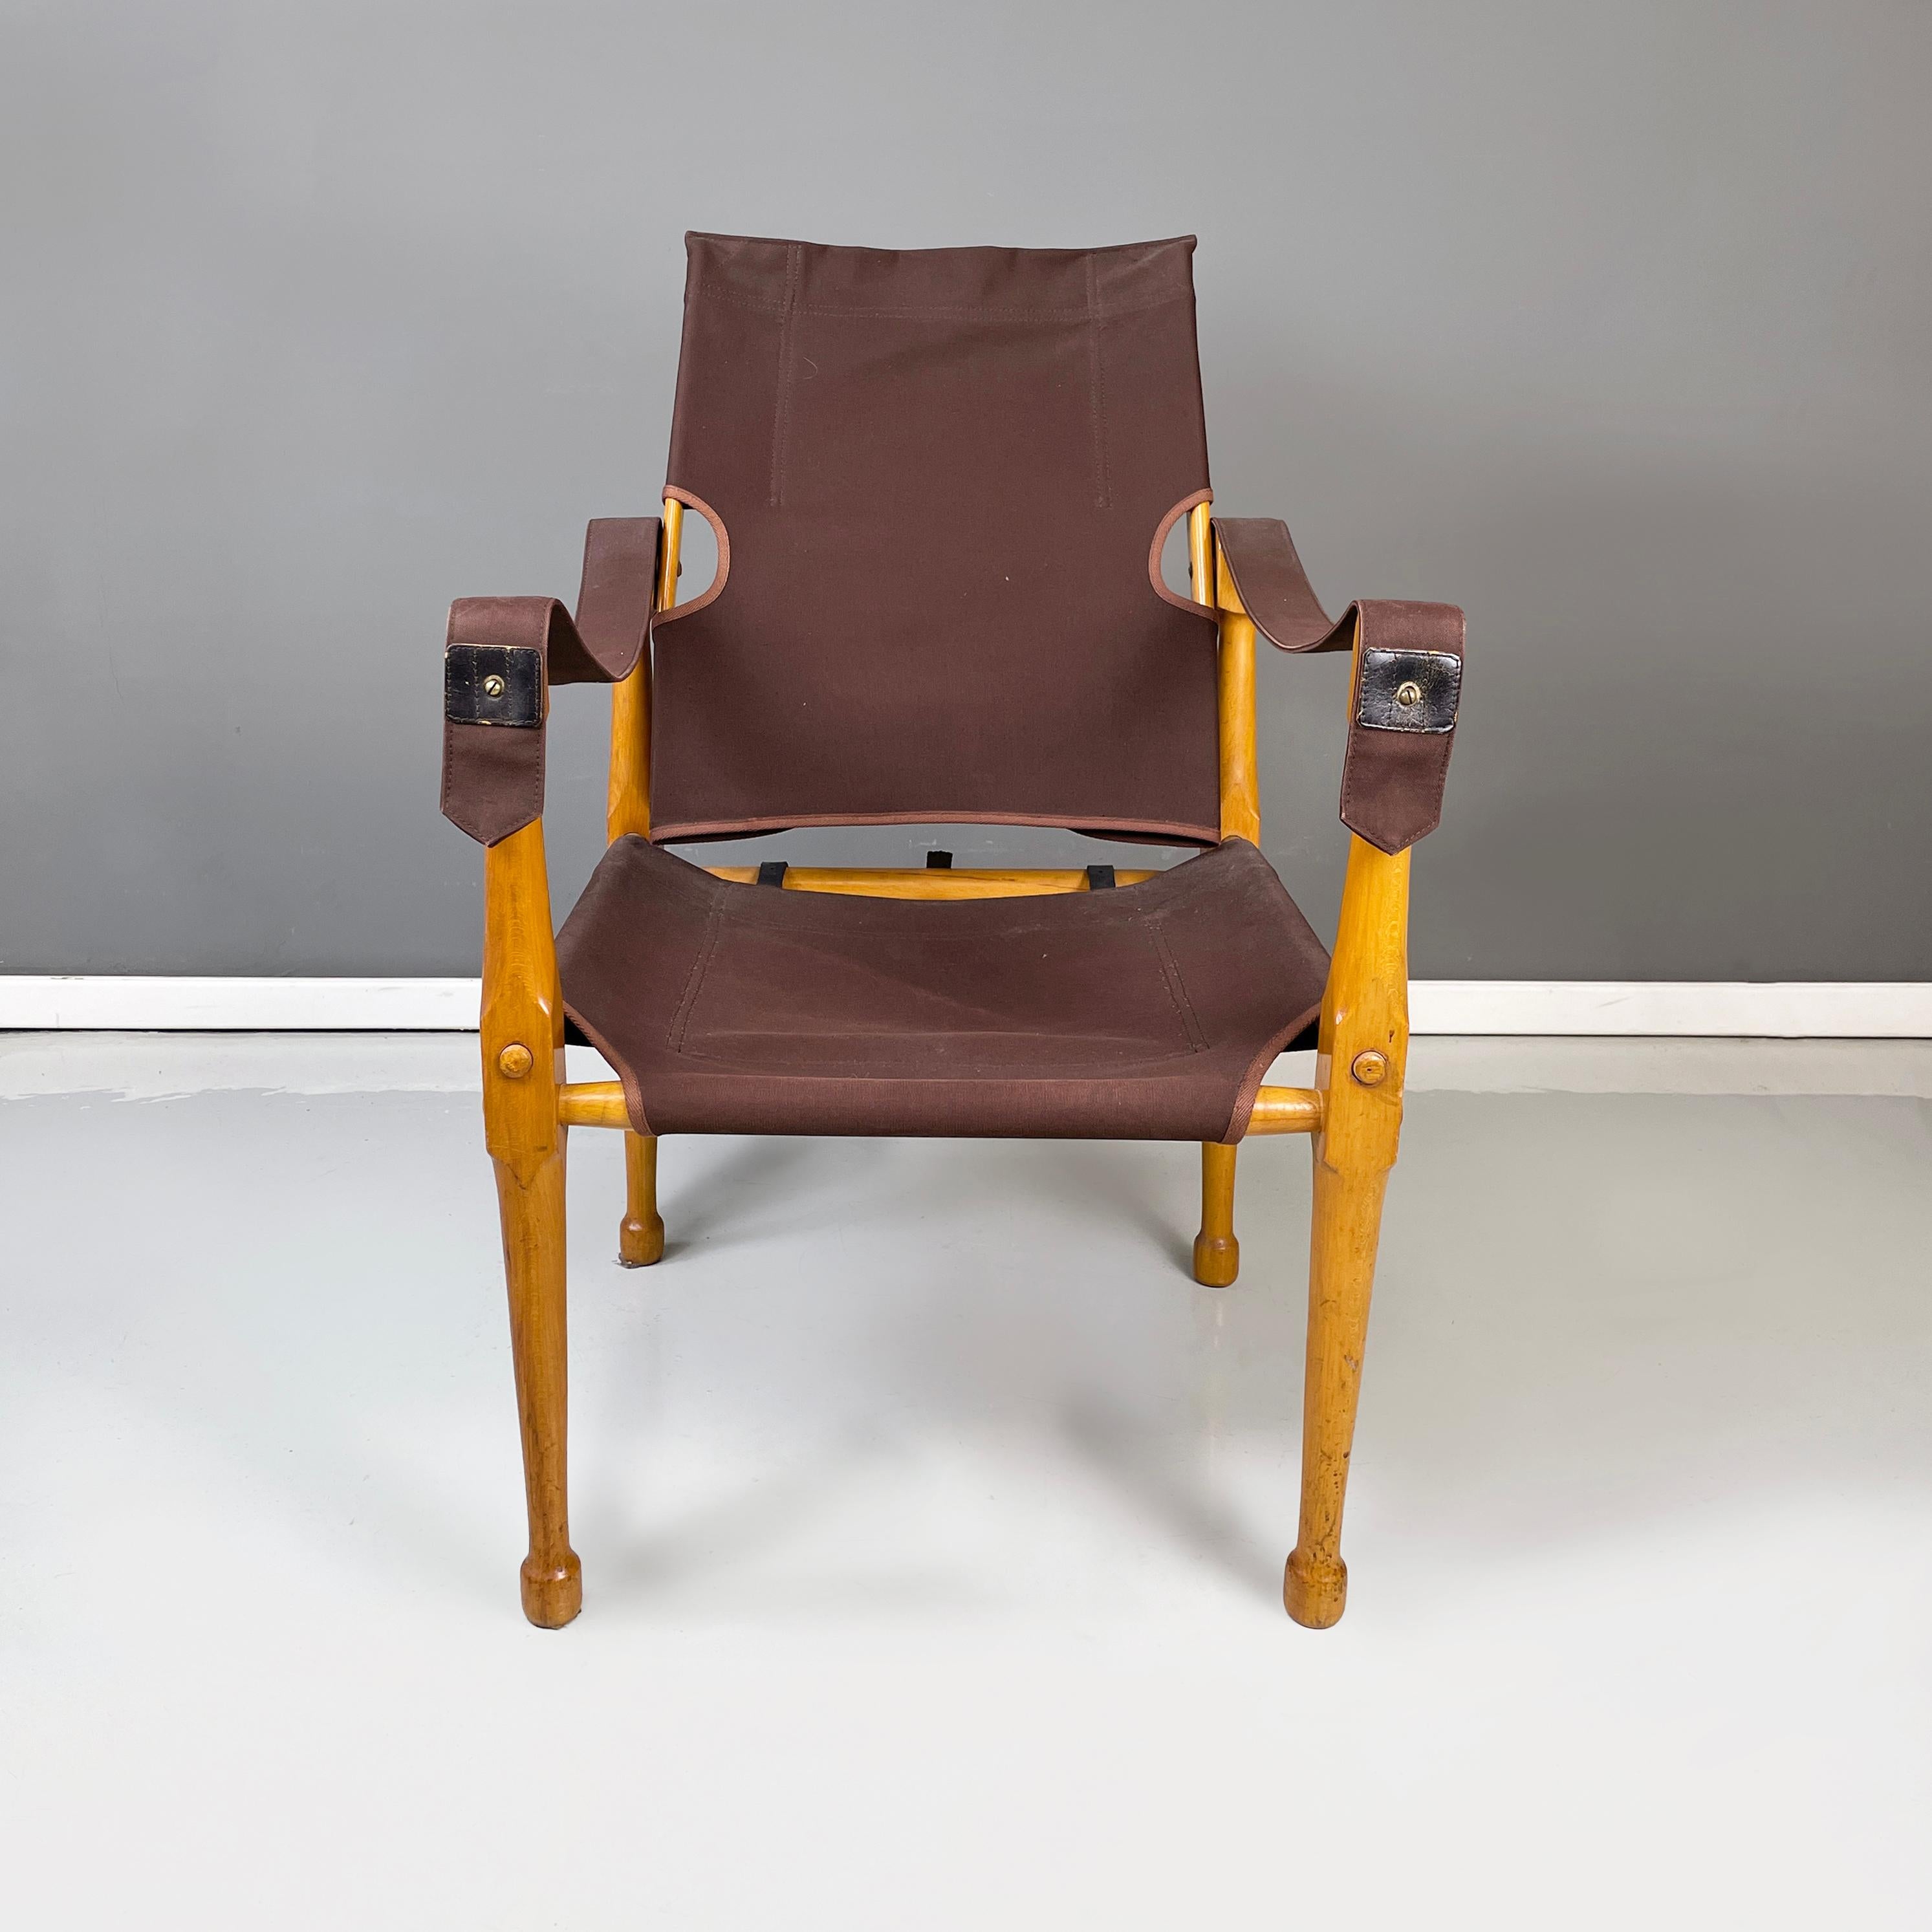 Italian mid-century Brown Armchair 86 Morettina by Bernard Marstaller for Zanotta, 1980s
iconic and vintage armchair mod. 86 Morettina with wooden structure, fixed by interlocking. The seat and back are made of dark brown cotton fabric. The backrest